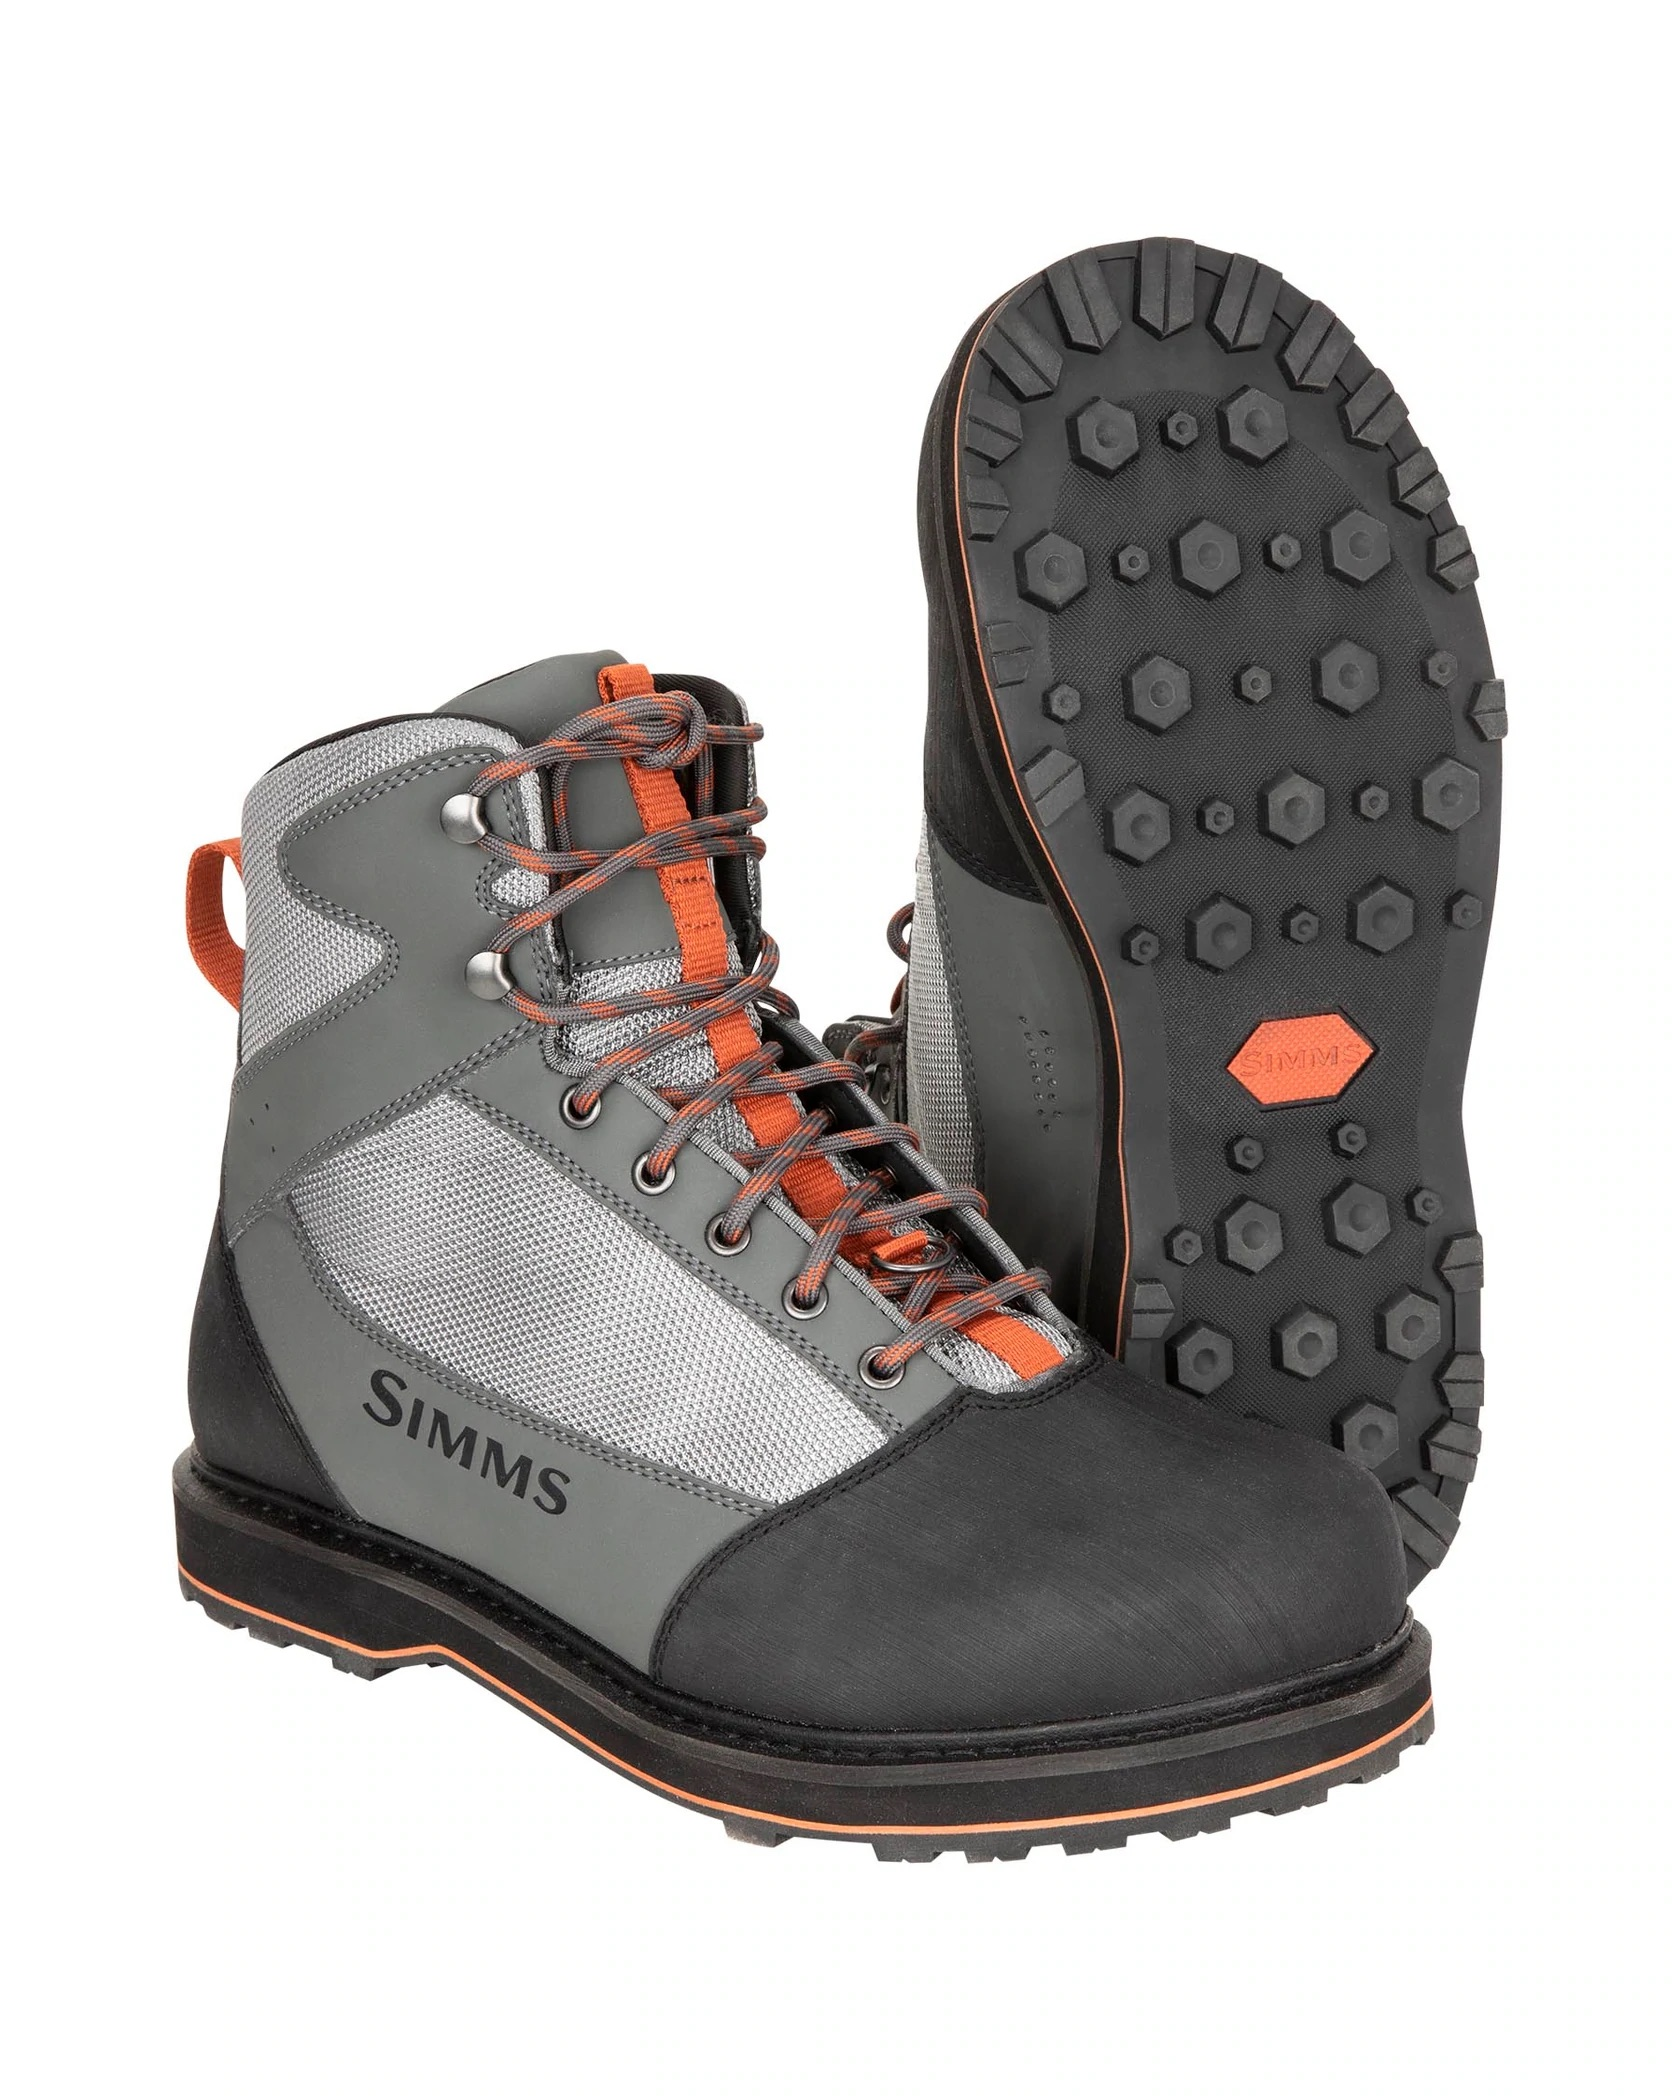 Simms Tributary Boot - Rubber - Size 7